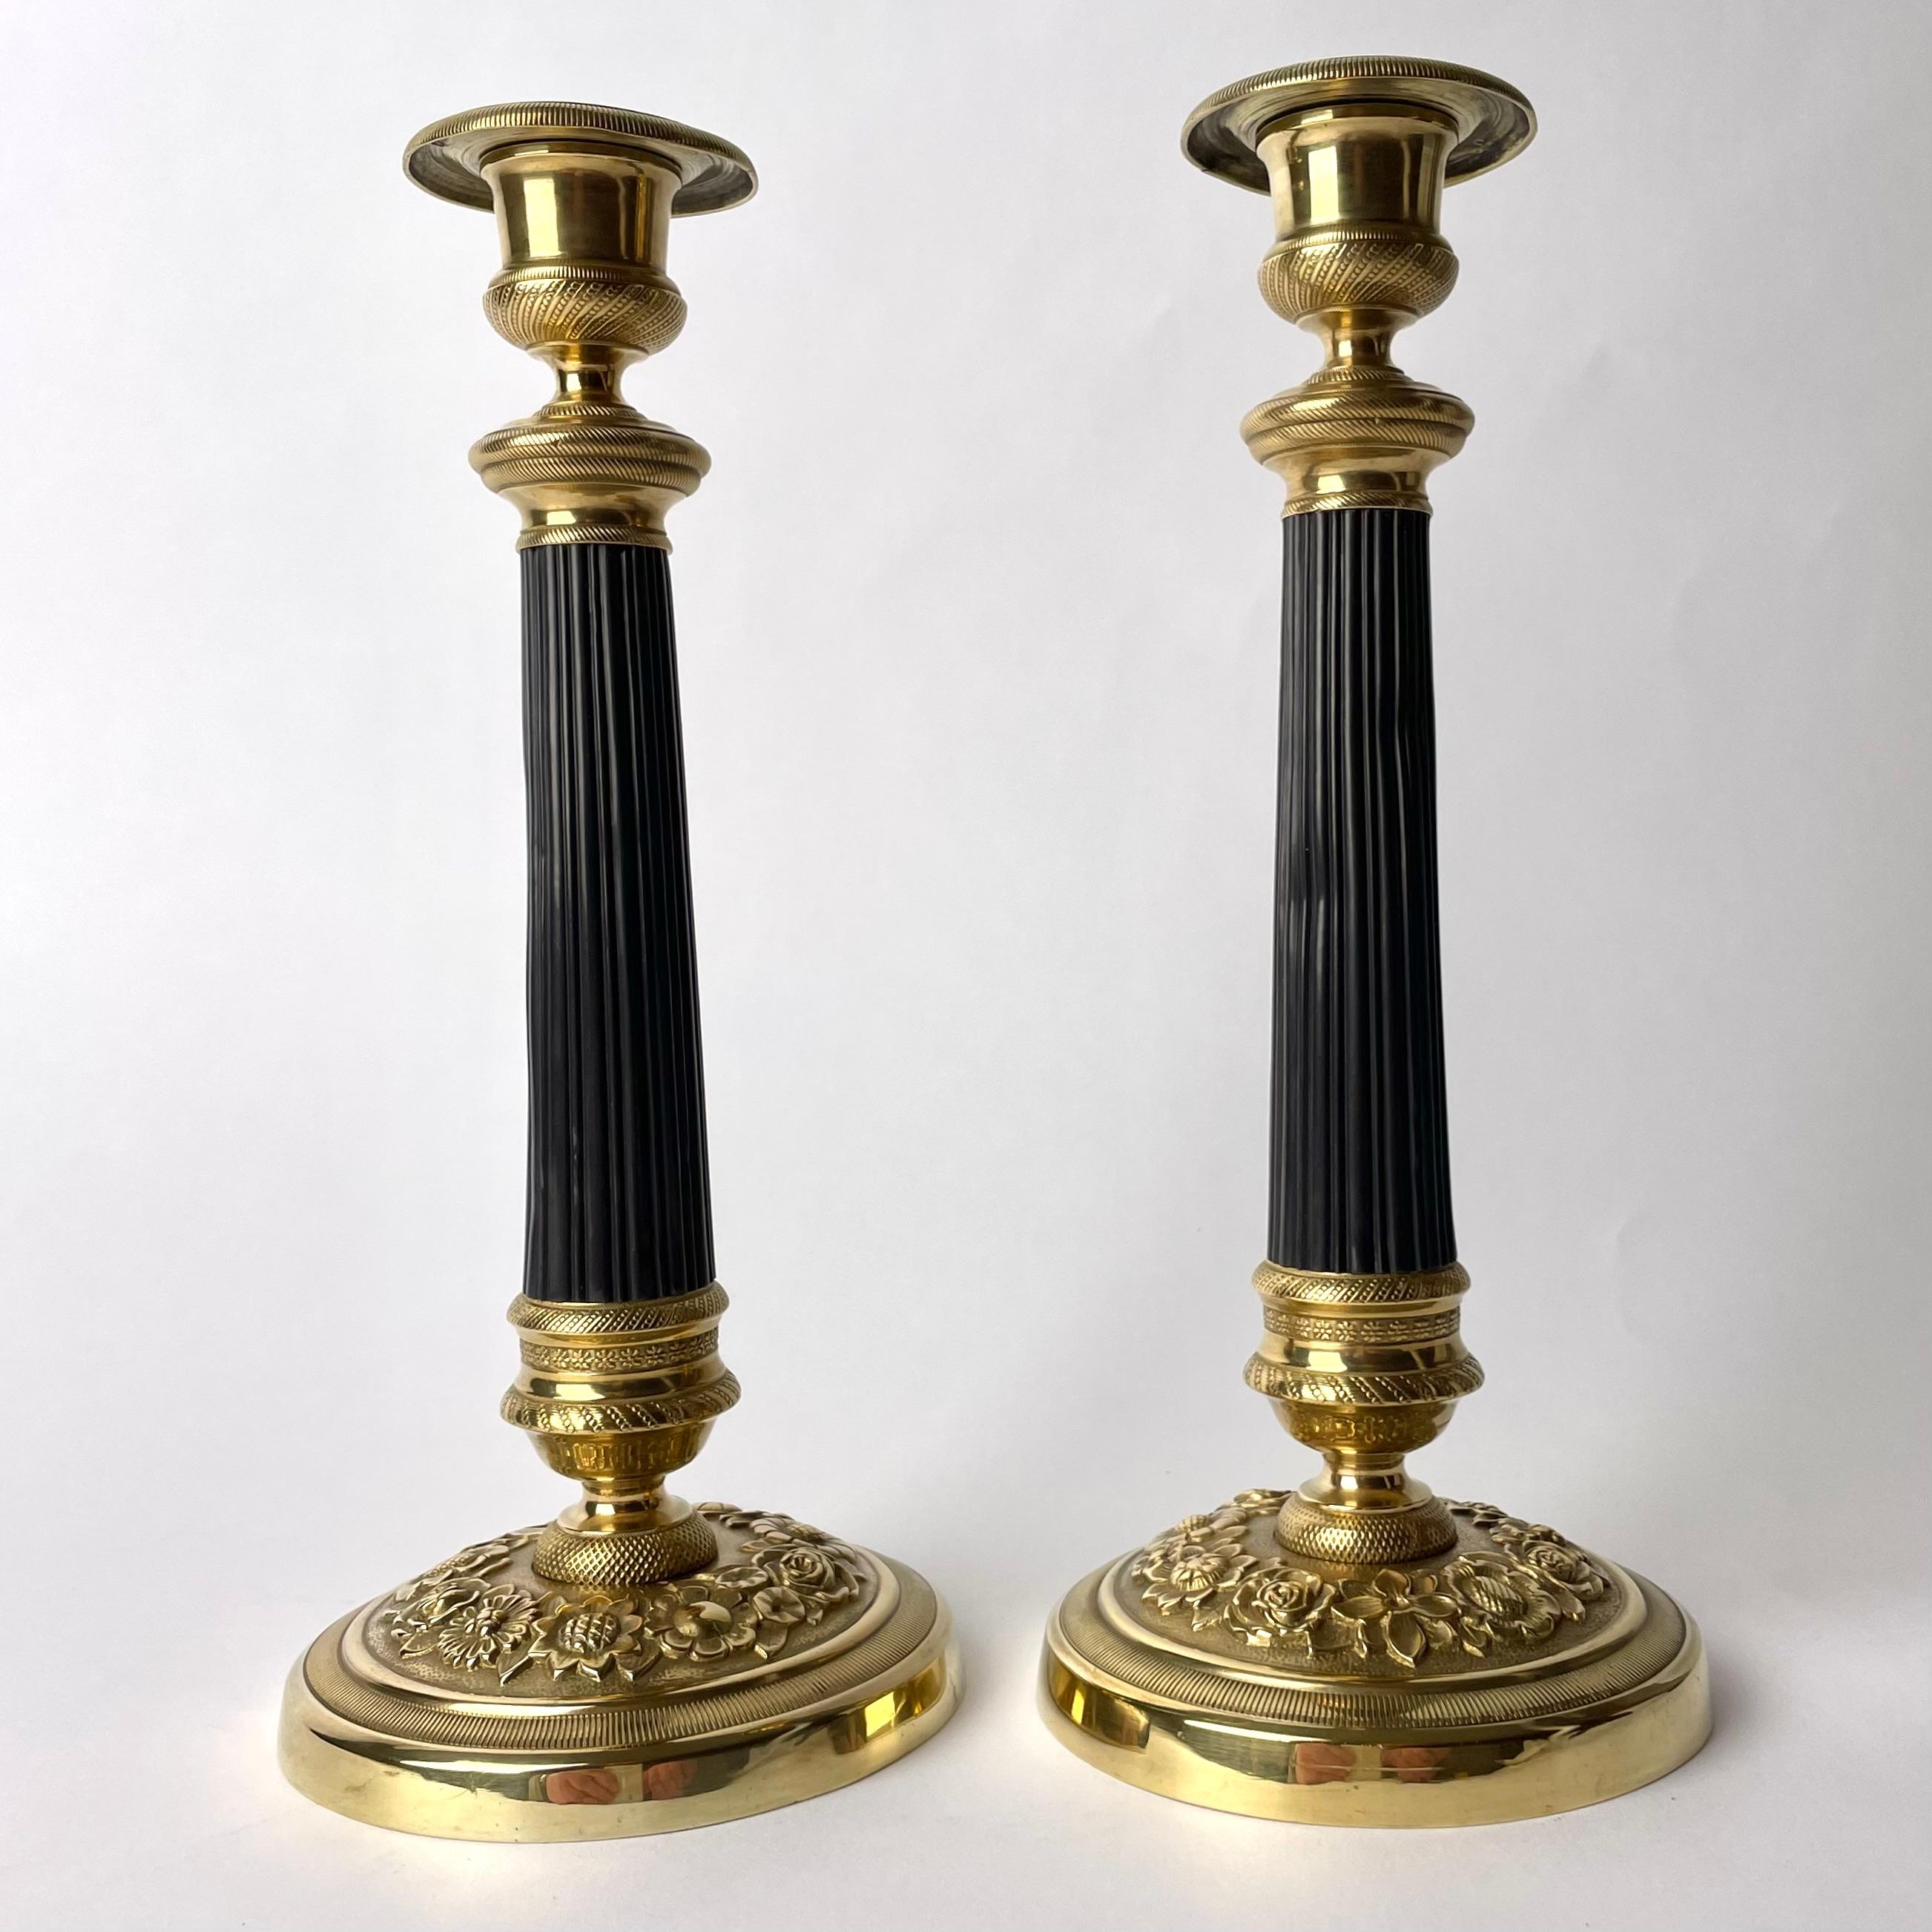 Pair of Empire Candlesticks in gilt and dark patinated bronze. Made in France during the 1820s. Beautiful decorated with flowers and a dark patinated column in the center of the candlestick.

Wear consistent with age and use 